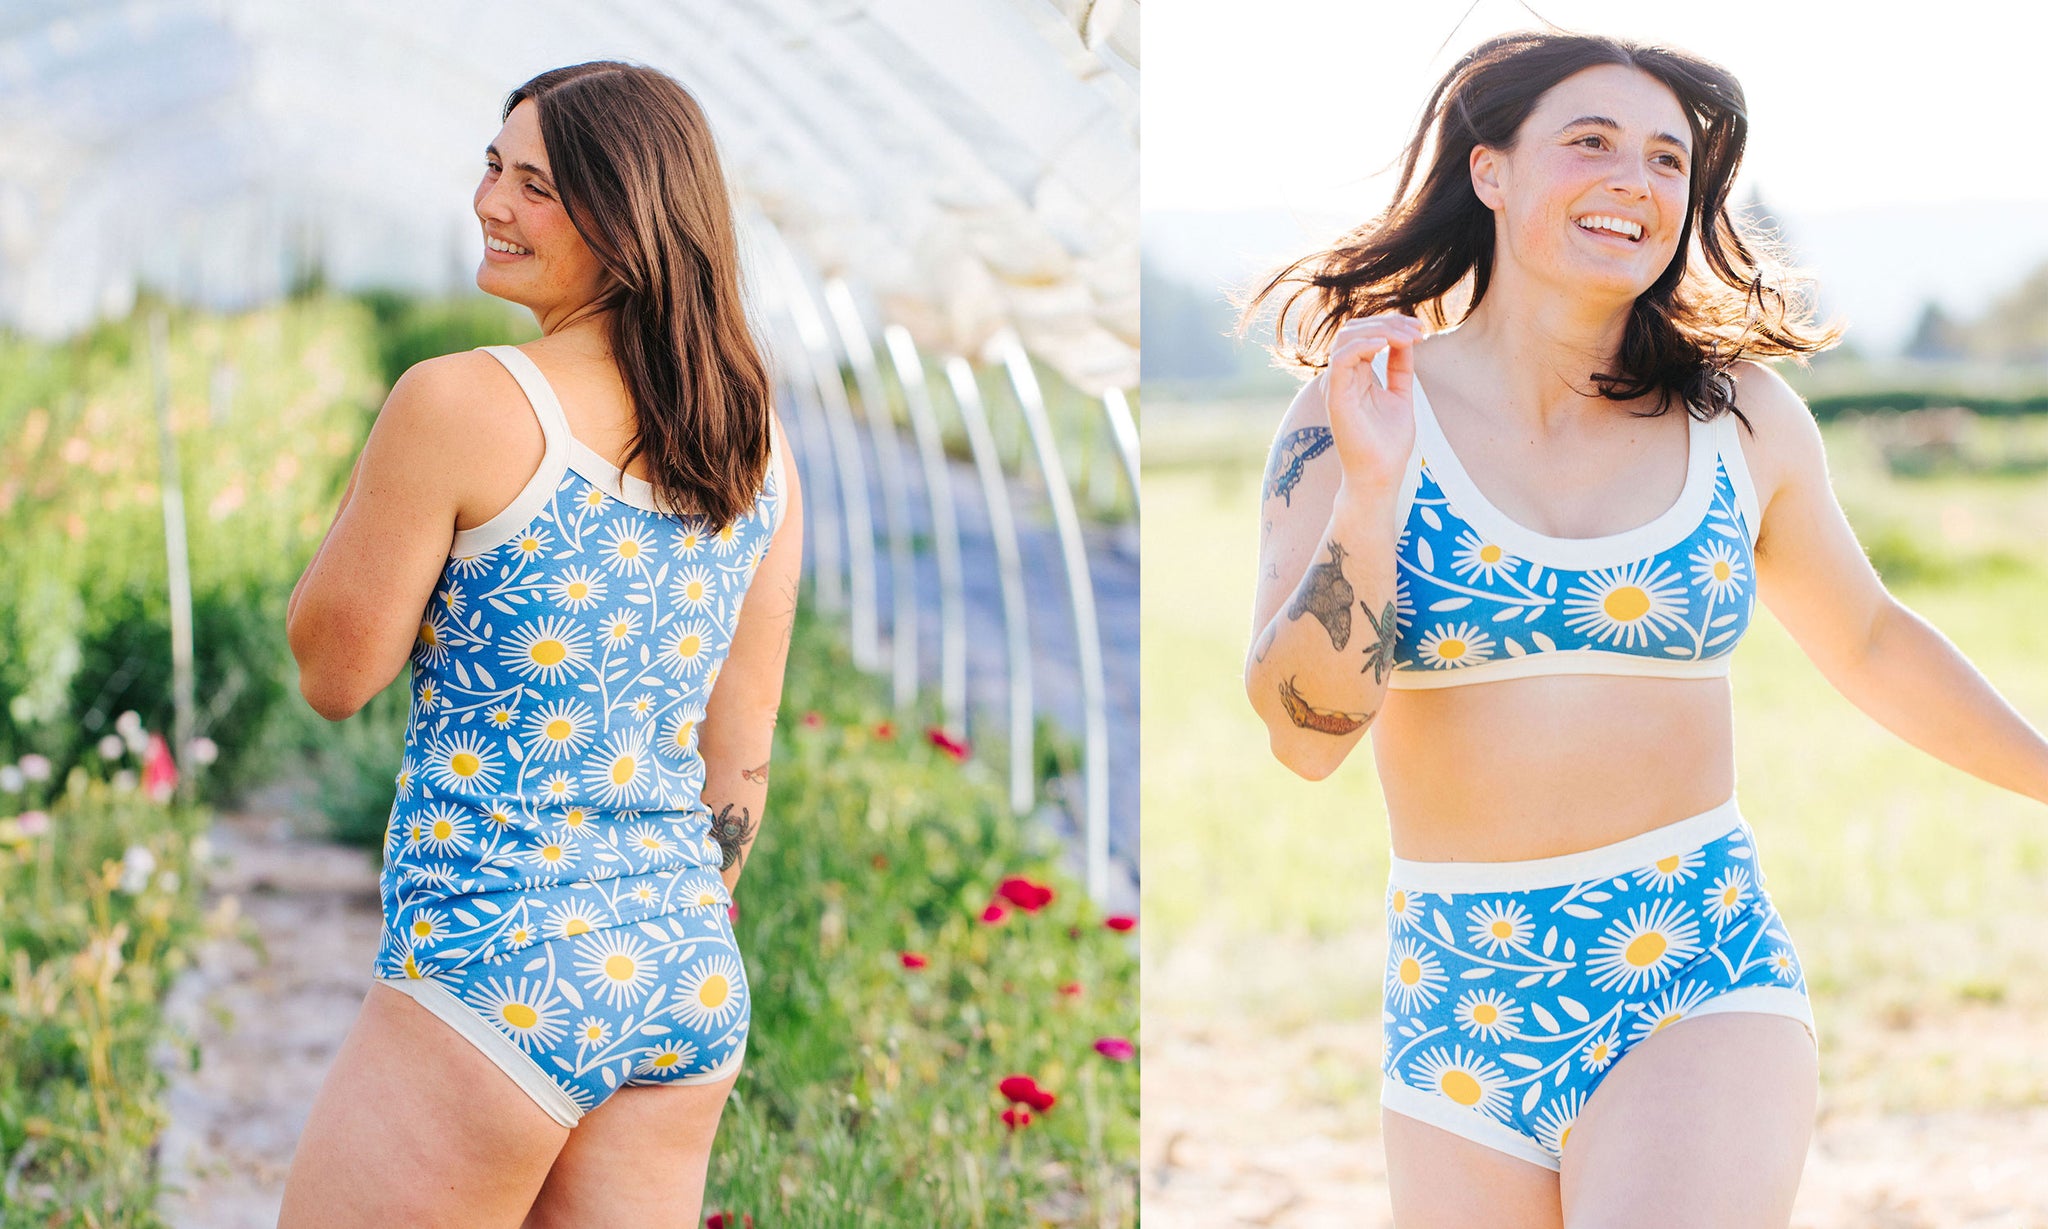 Model smiling in a field wearing various styles of our Daisy Days print: blue print with white and yellow daisies.